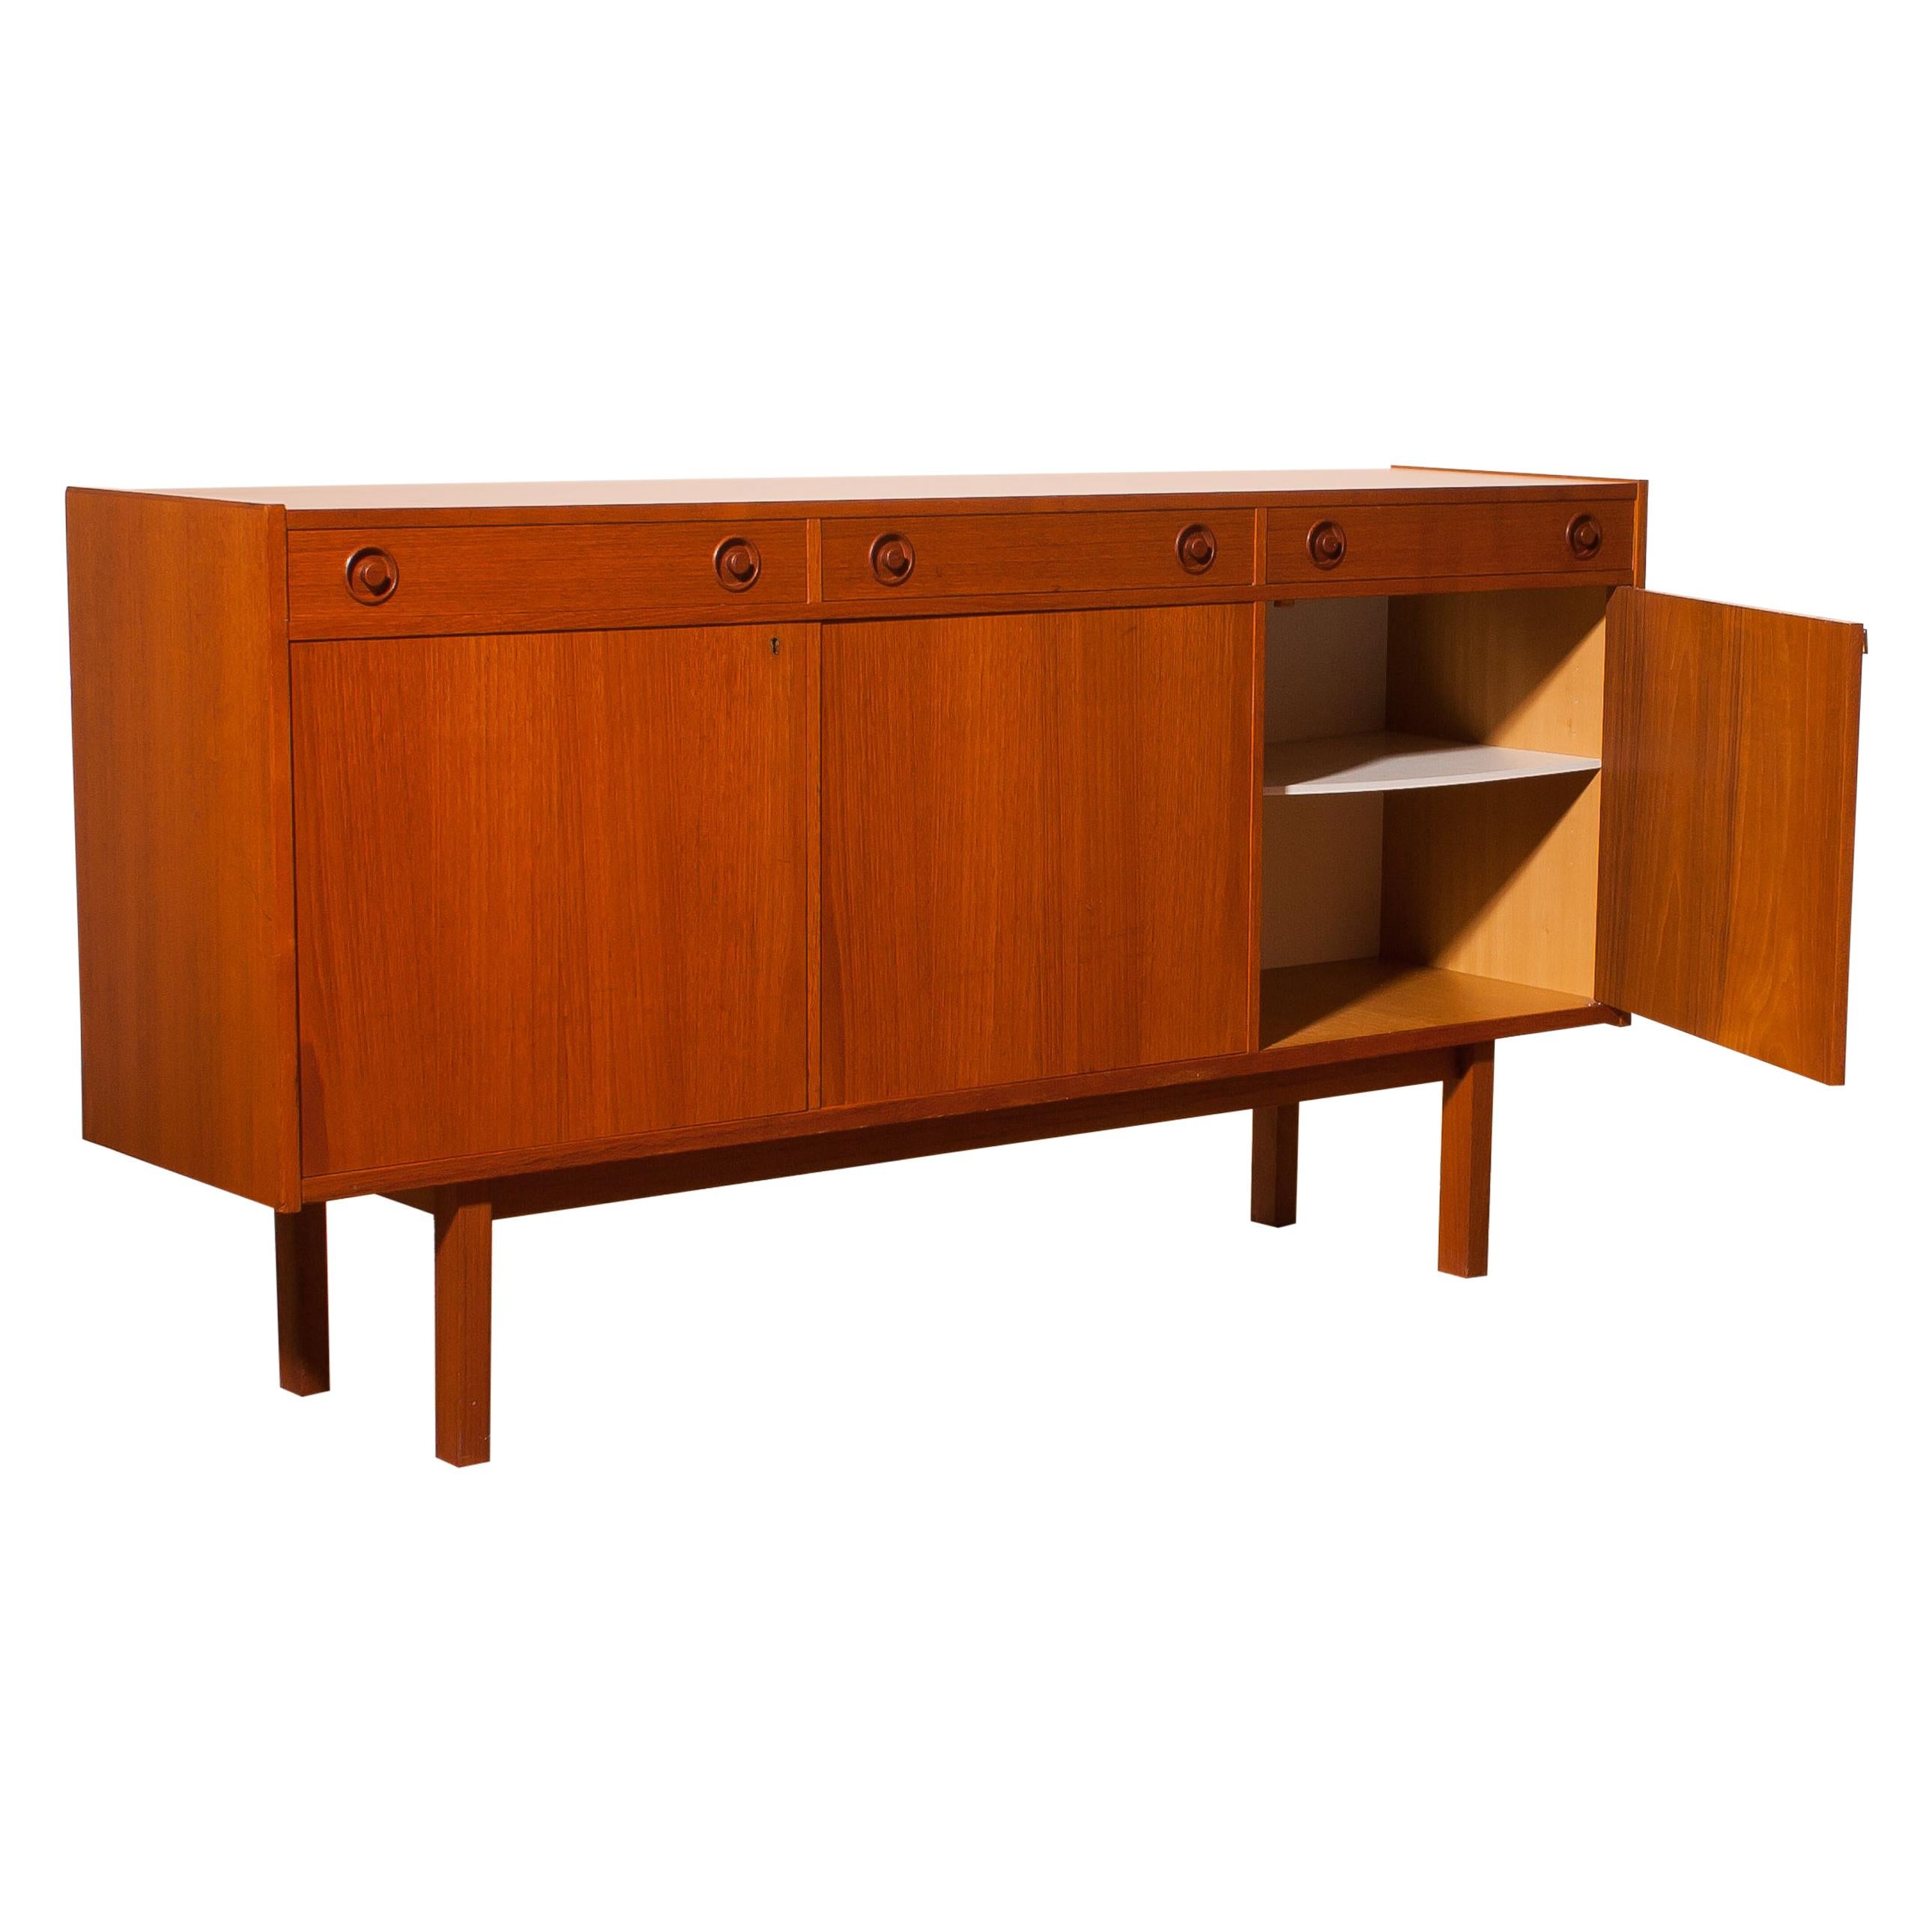 Beautiful sideboard produced by Brexo Möbler, Sweden.
This cabinet is made of teak and has three drawers and three doors.
It is in very nice condition with just a little spot on the top.
Key included.
Period 1950s.
Dimensions: H 90 cm, W 170